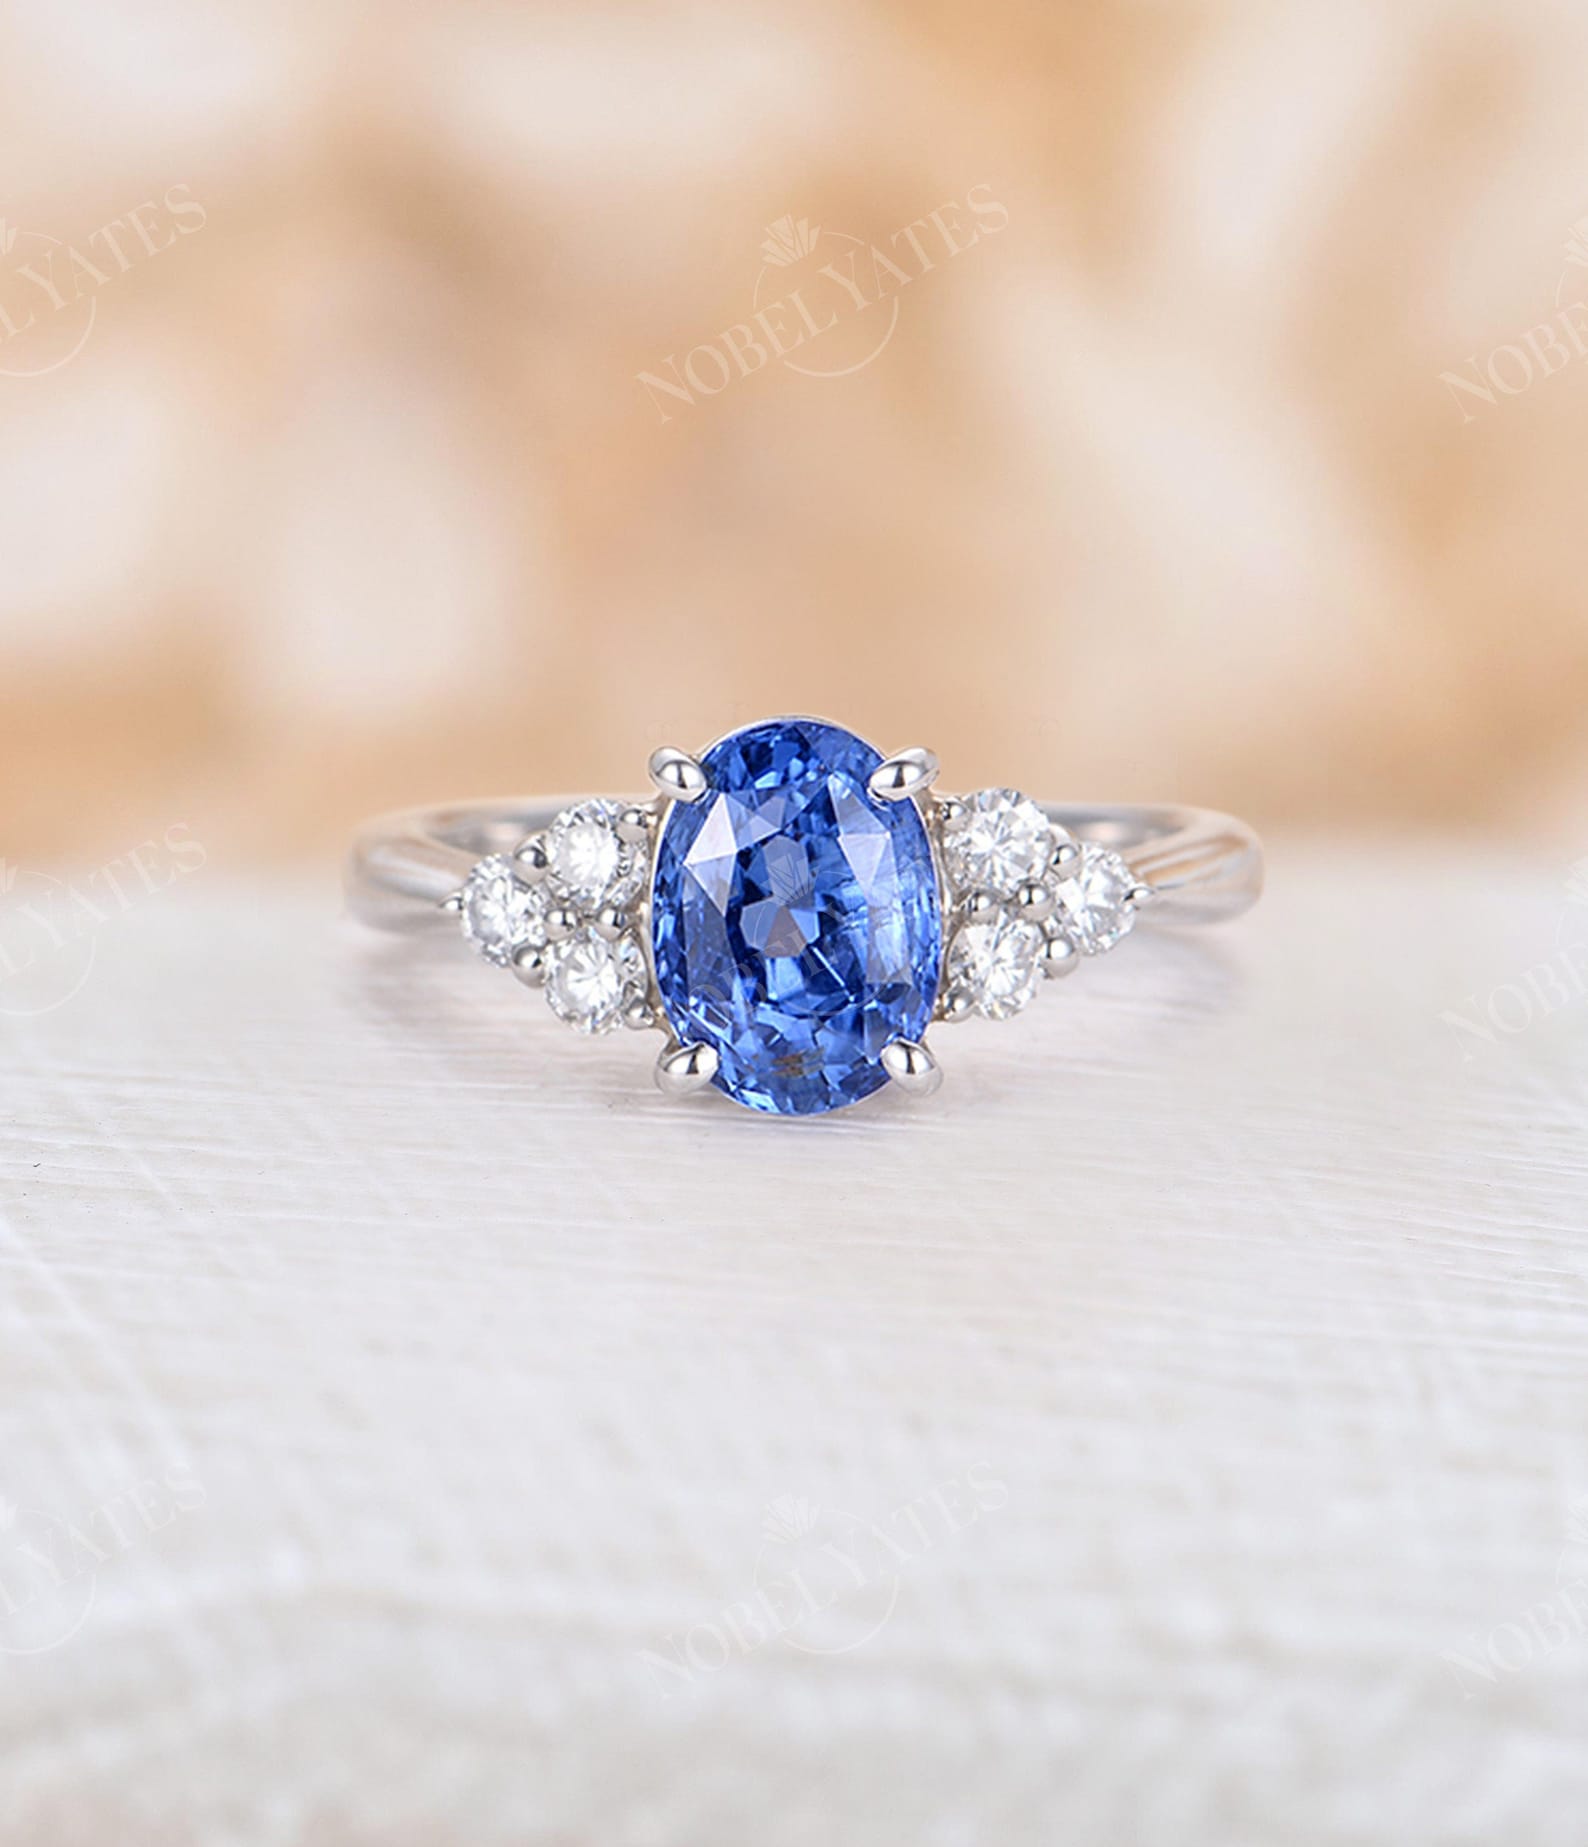 Cornflower Sapphire Engagement Ring Vintage Oval Cut Ring - Etsy